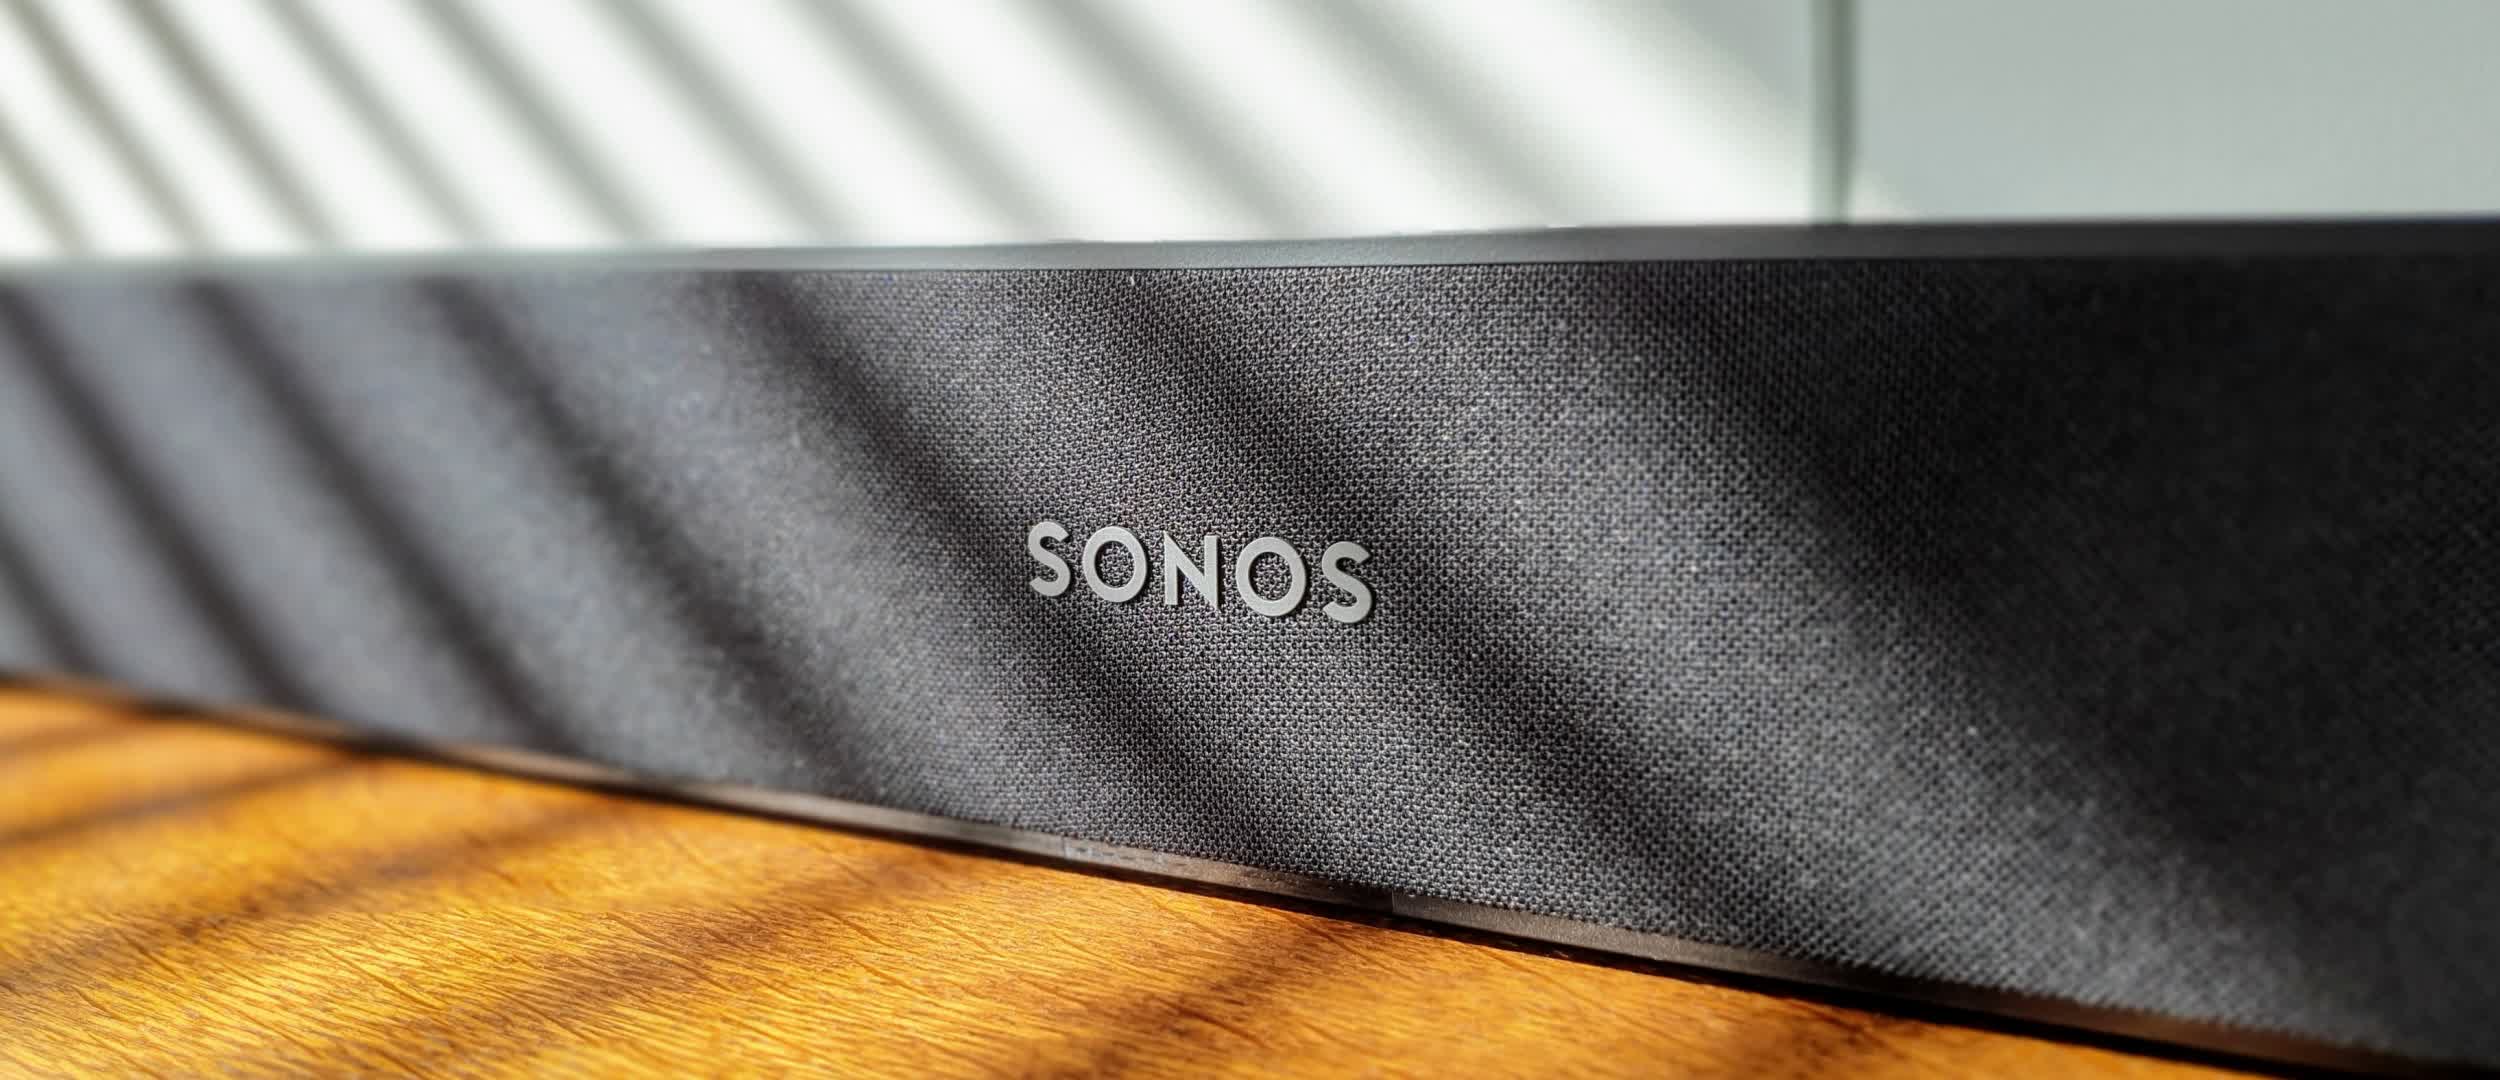 Sonos plans to enter four new product categories starting next year